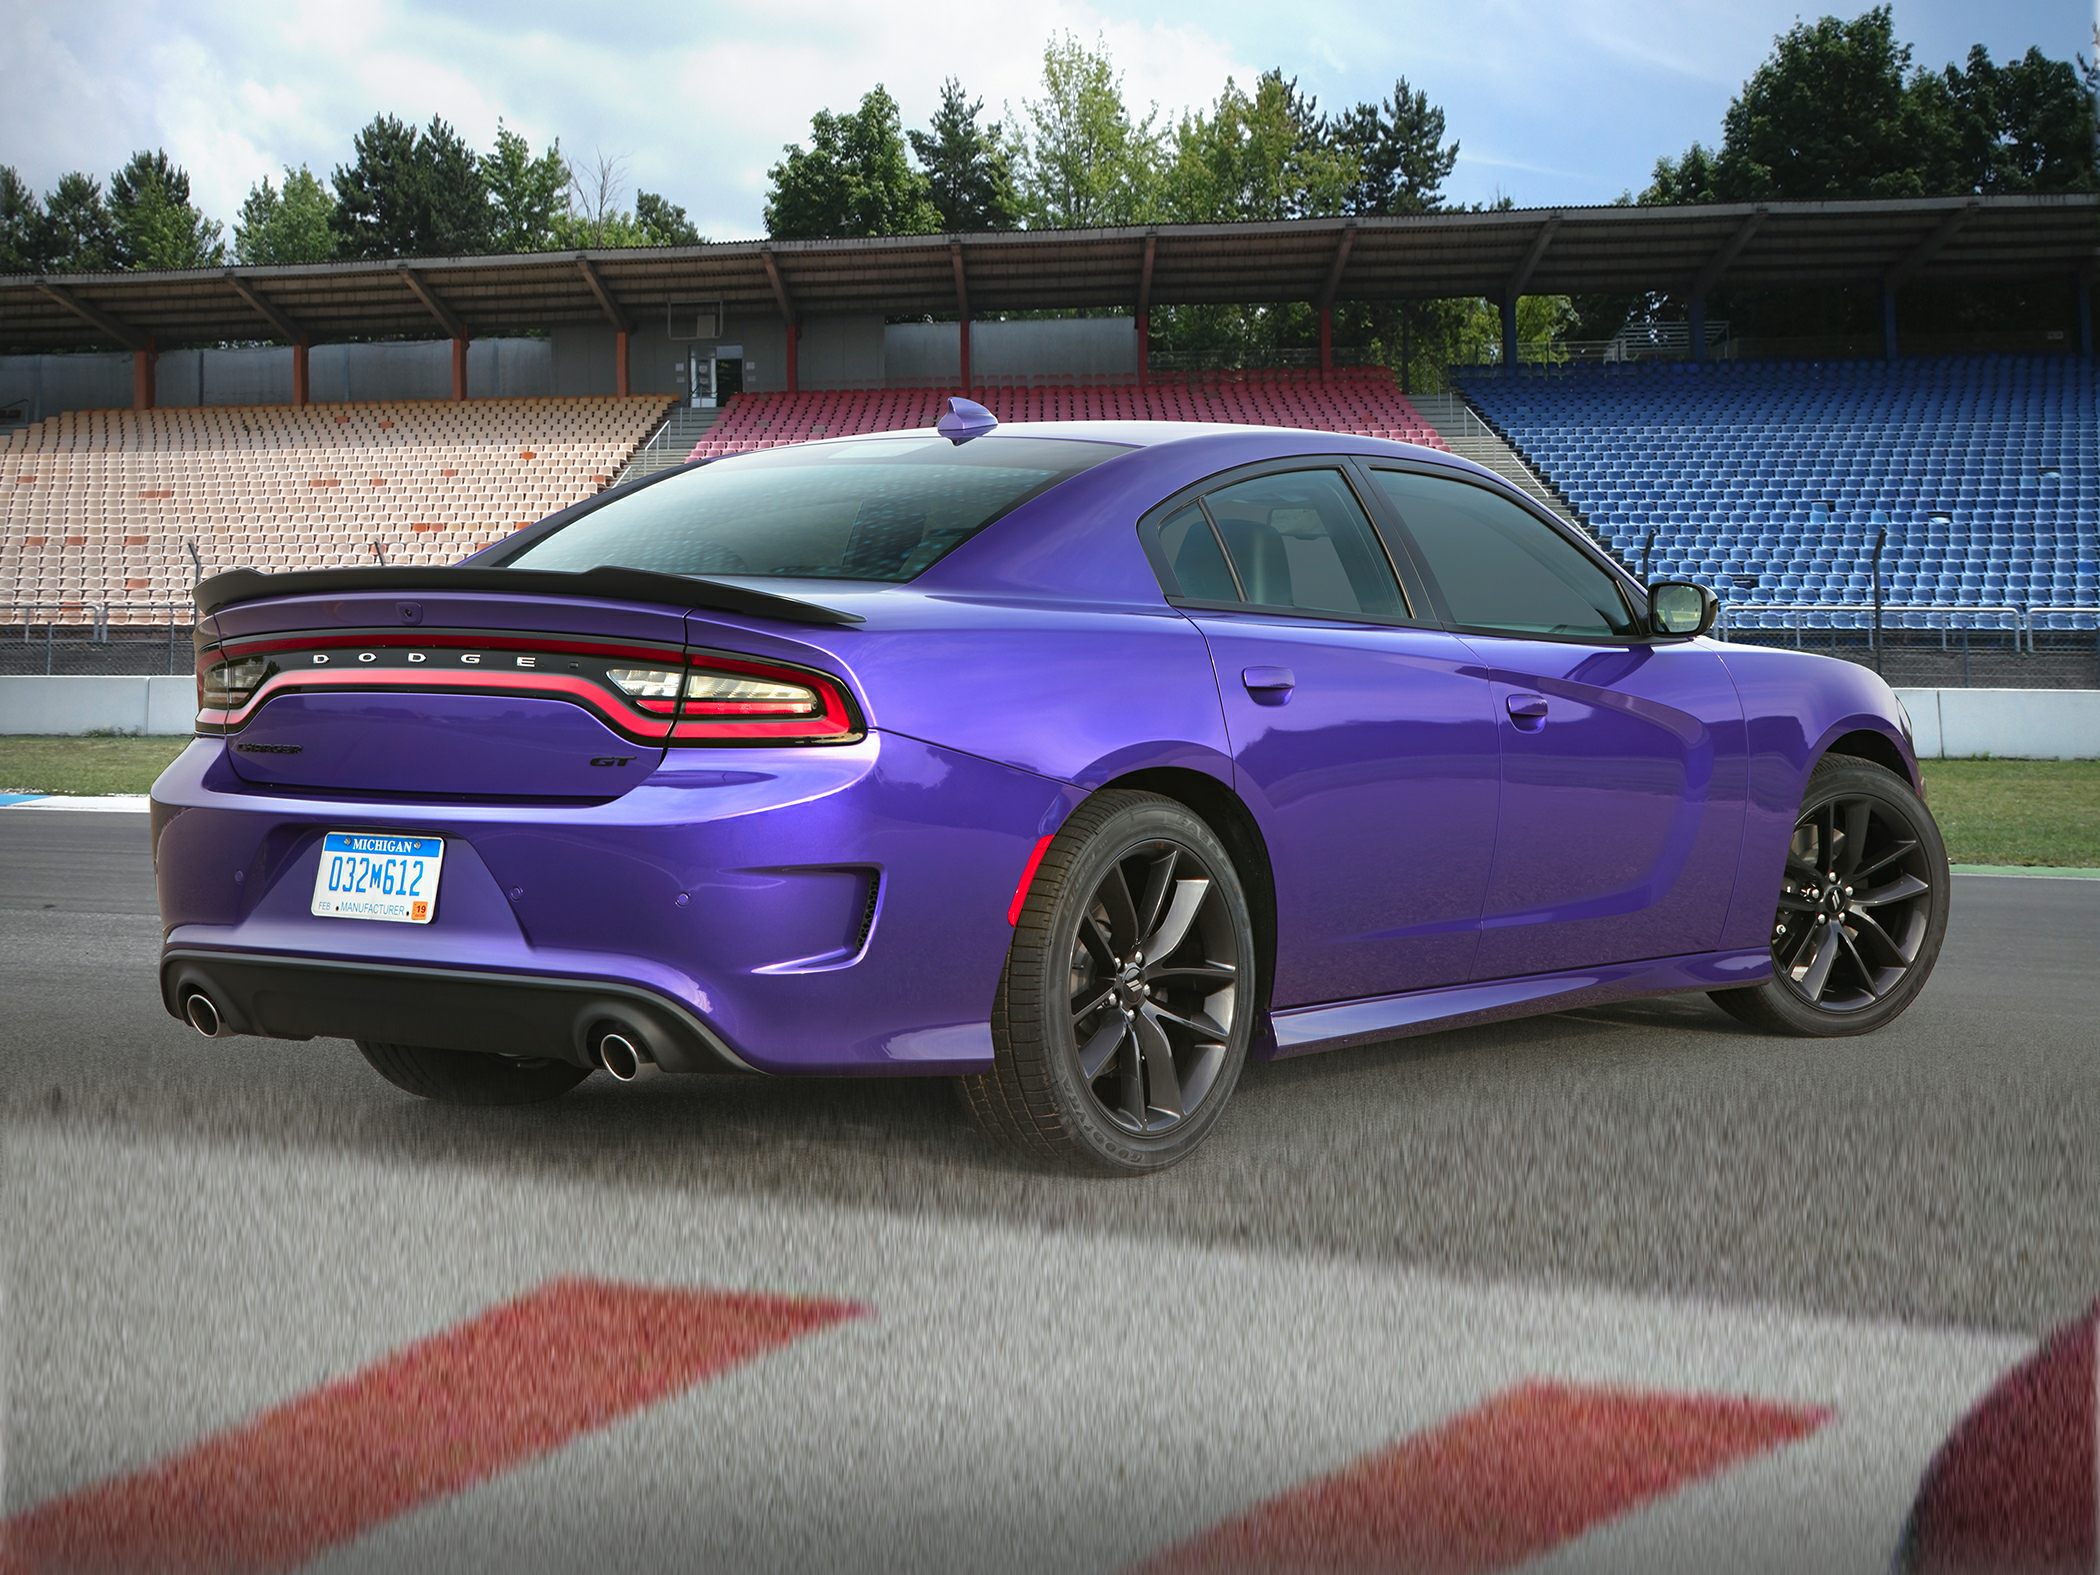 2019 Dodge Charger Deals Prices Incentives Leases Overview 